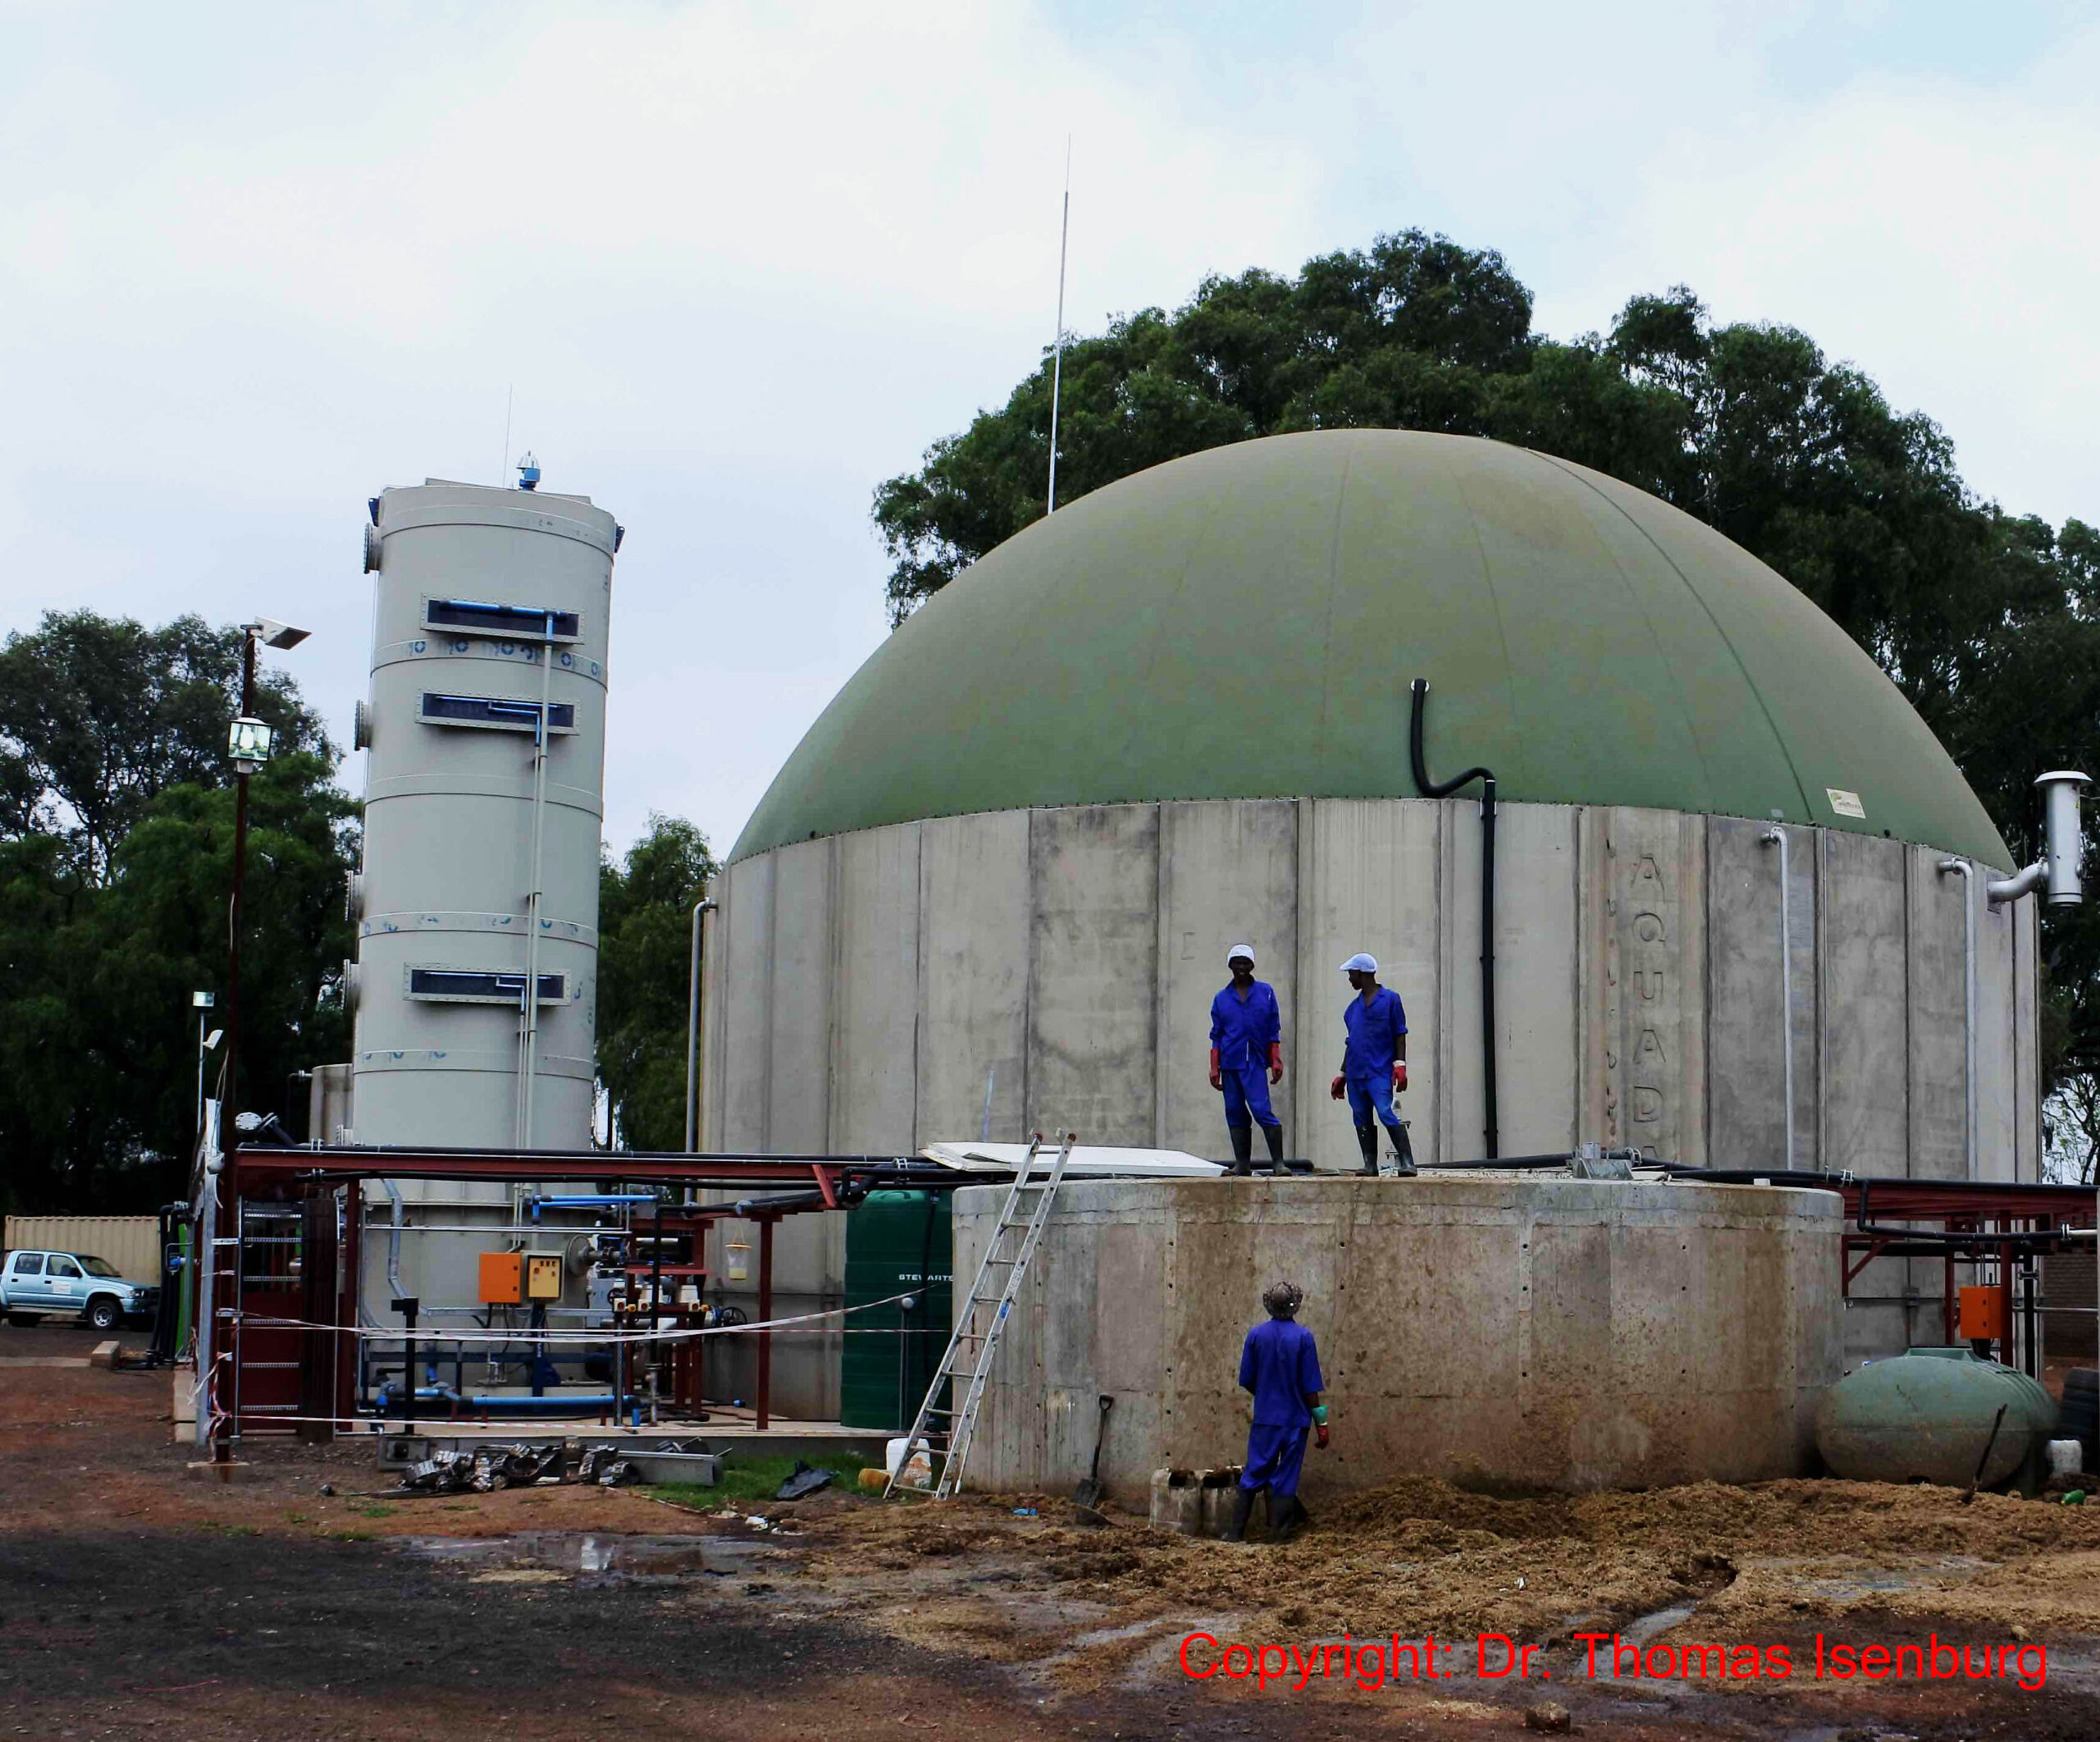 Biogas players in Africa are uniting